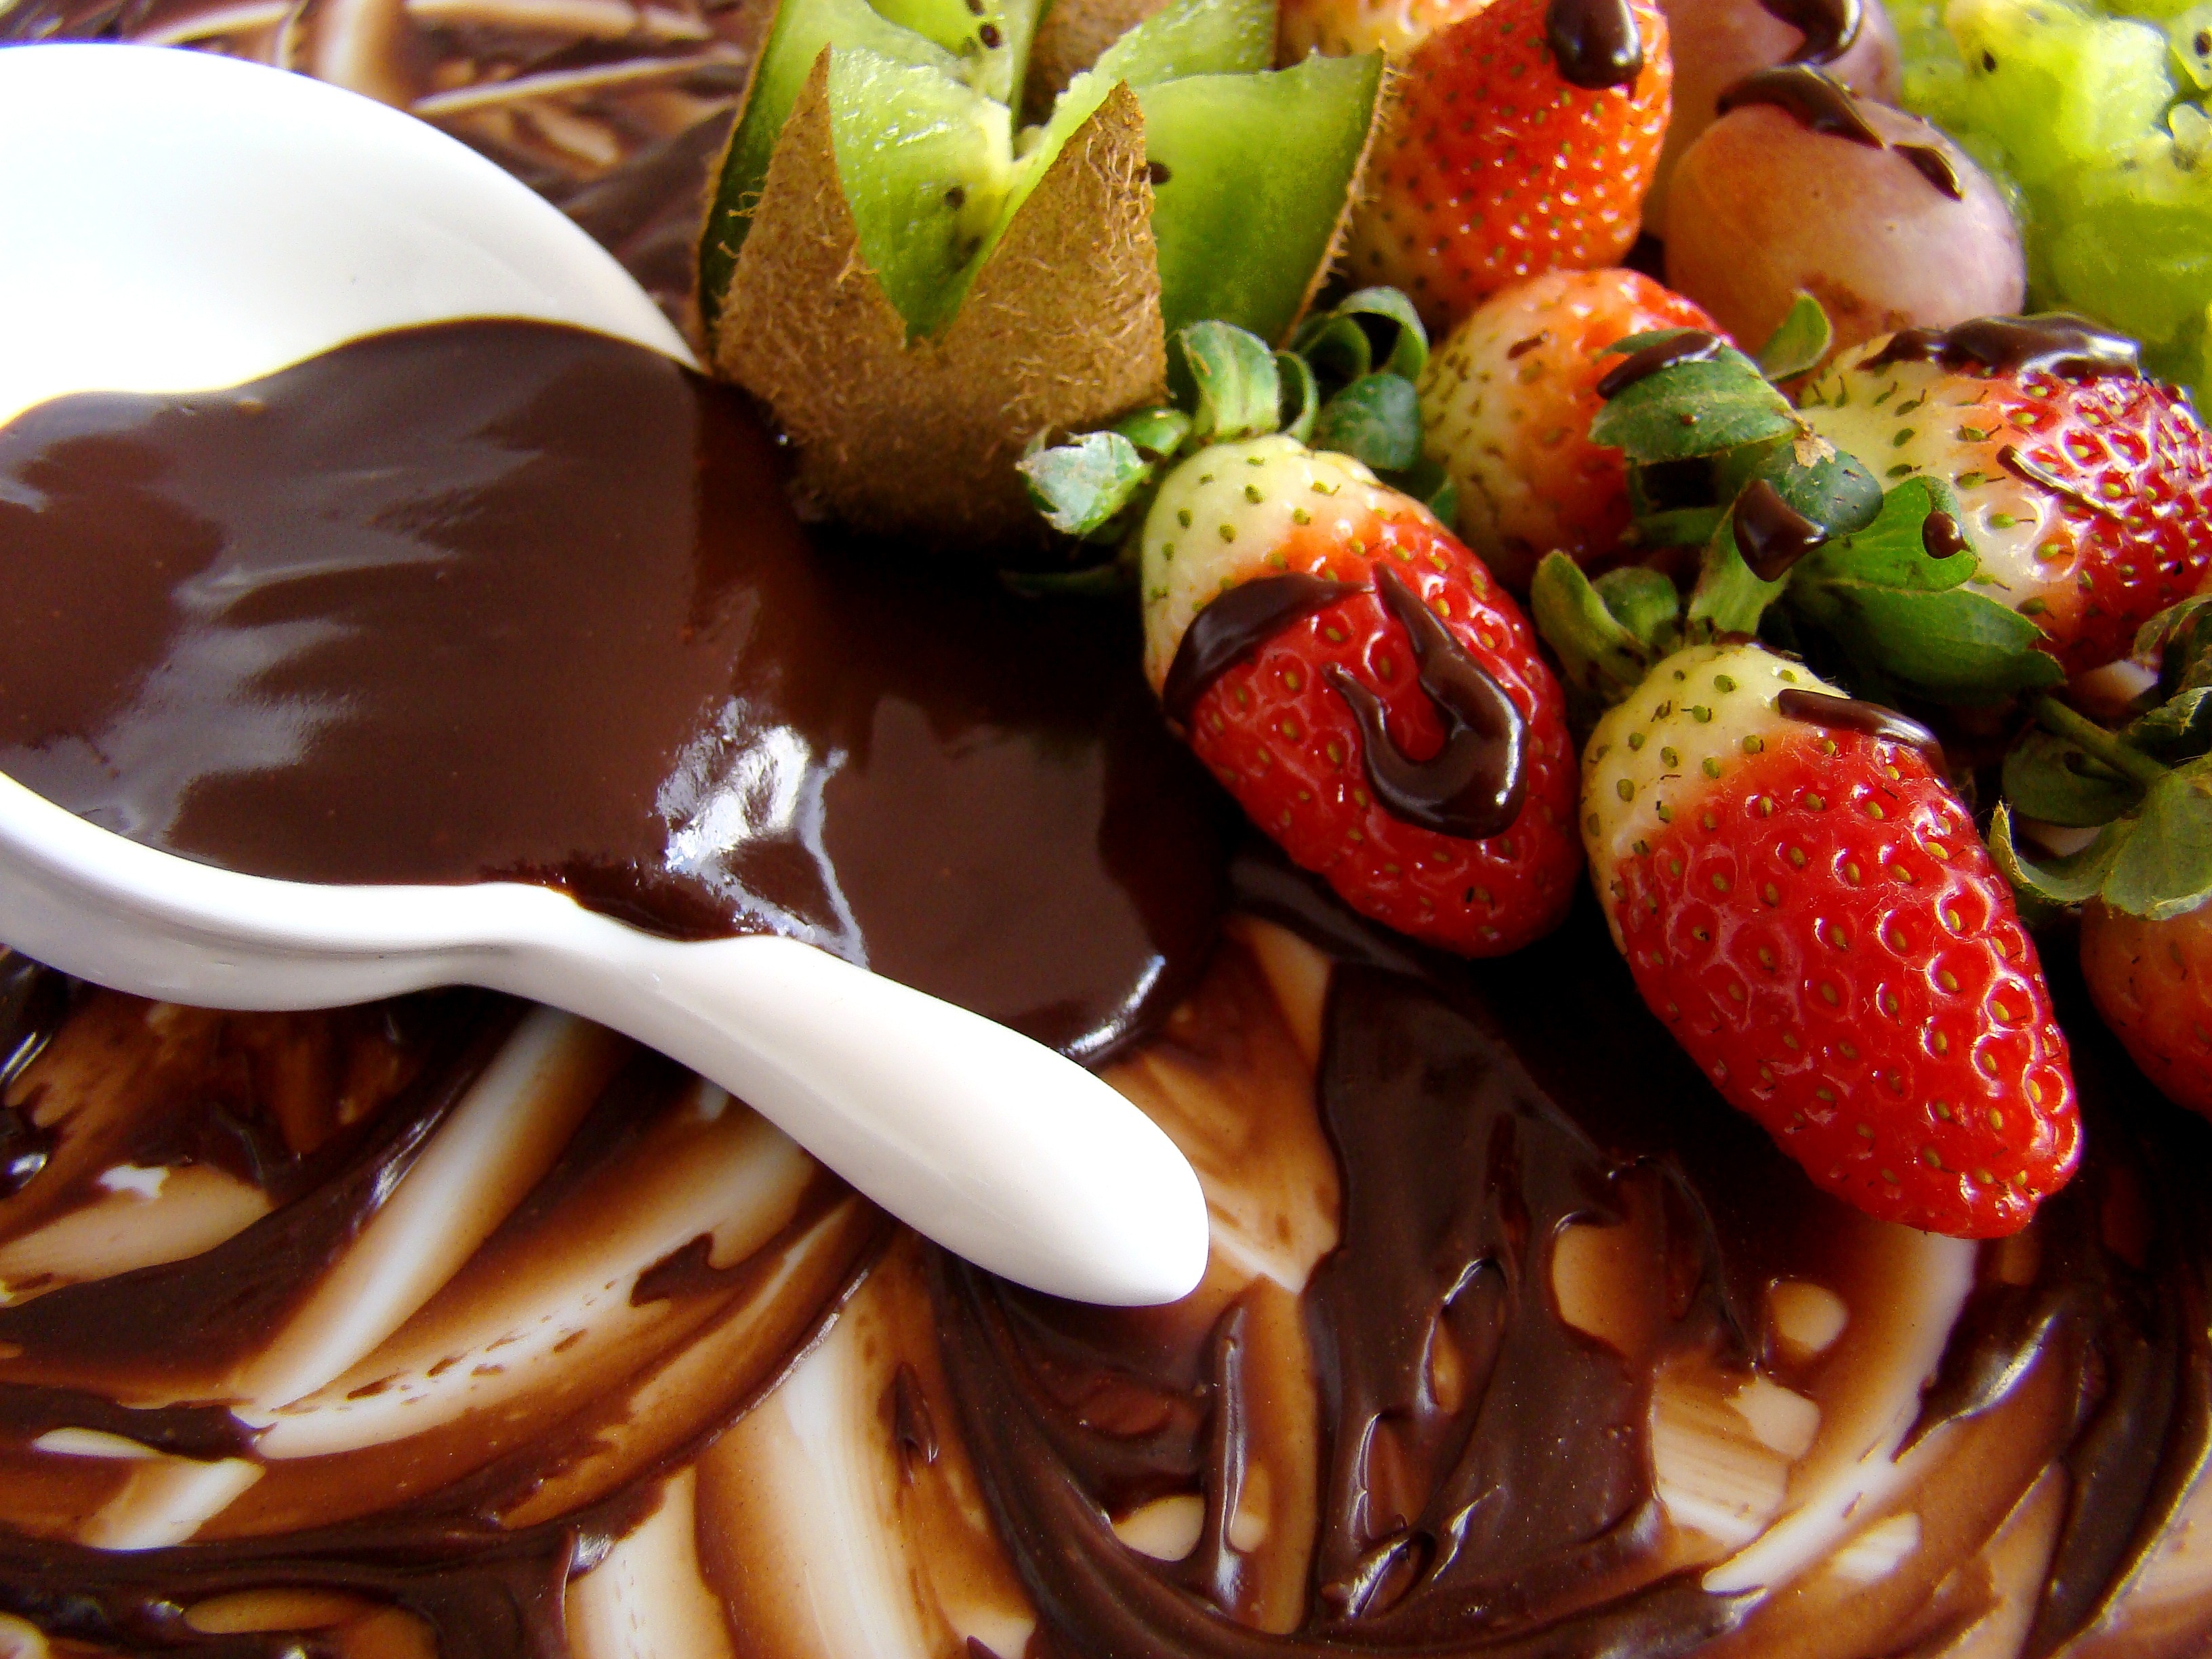 strawberries with chocolate